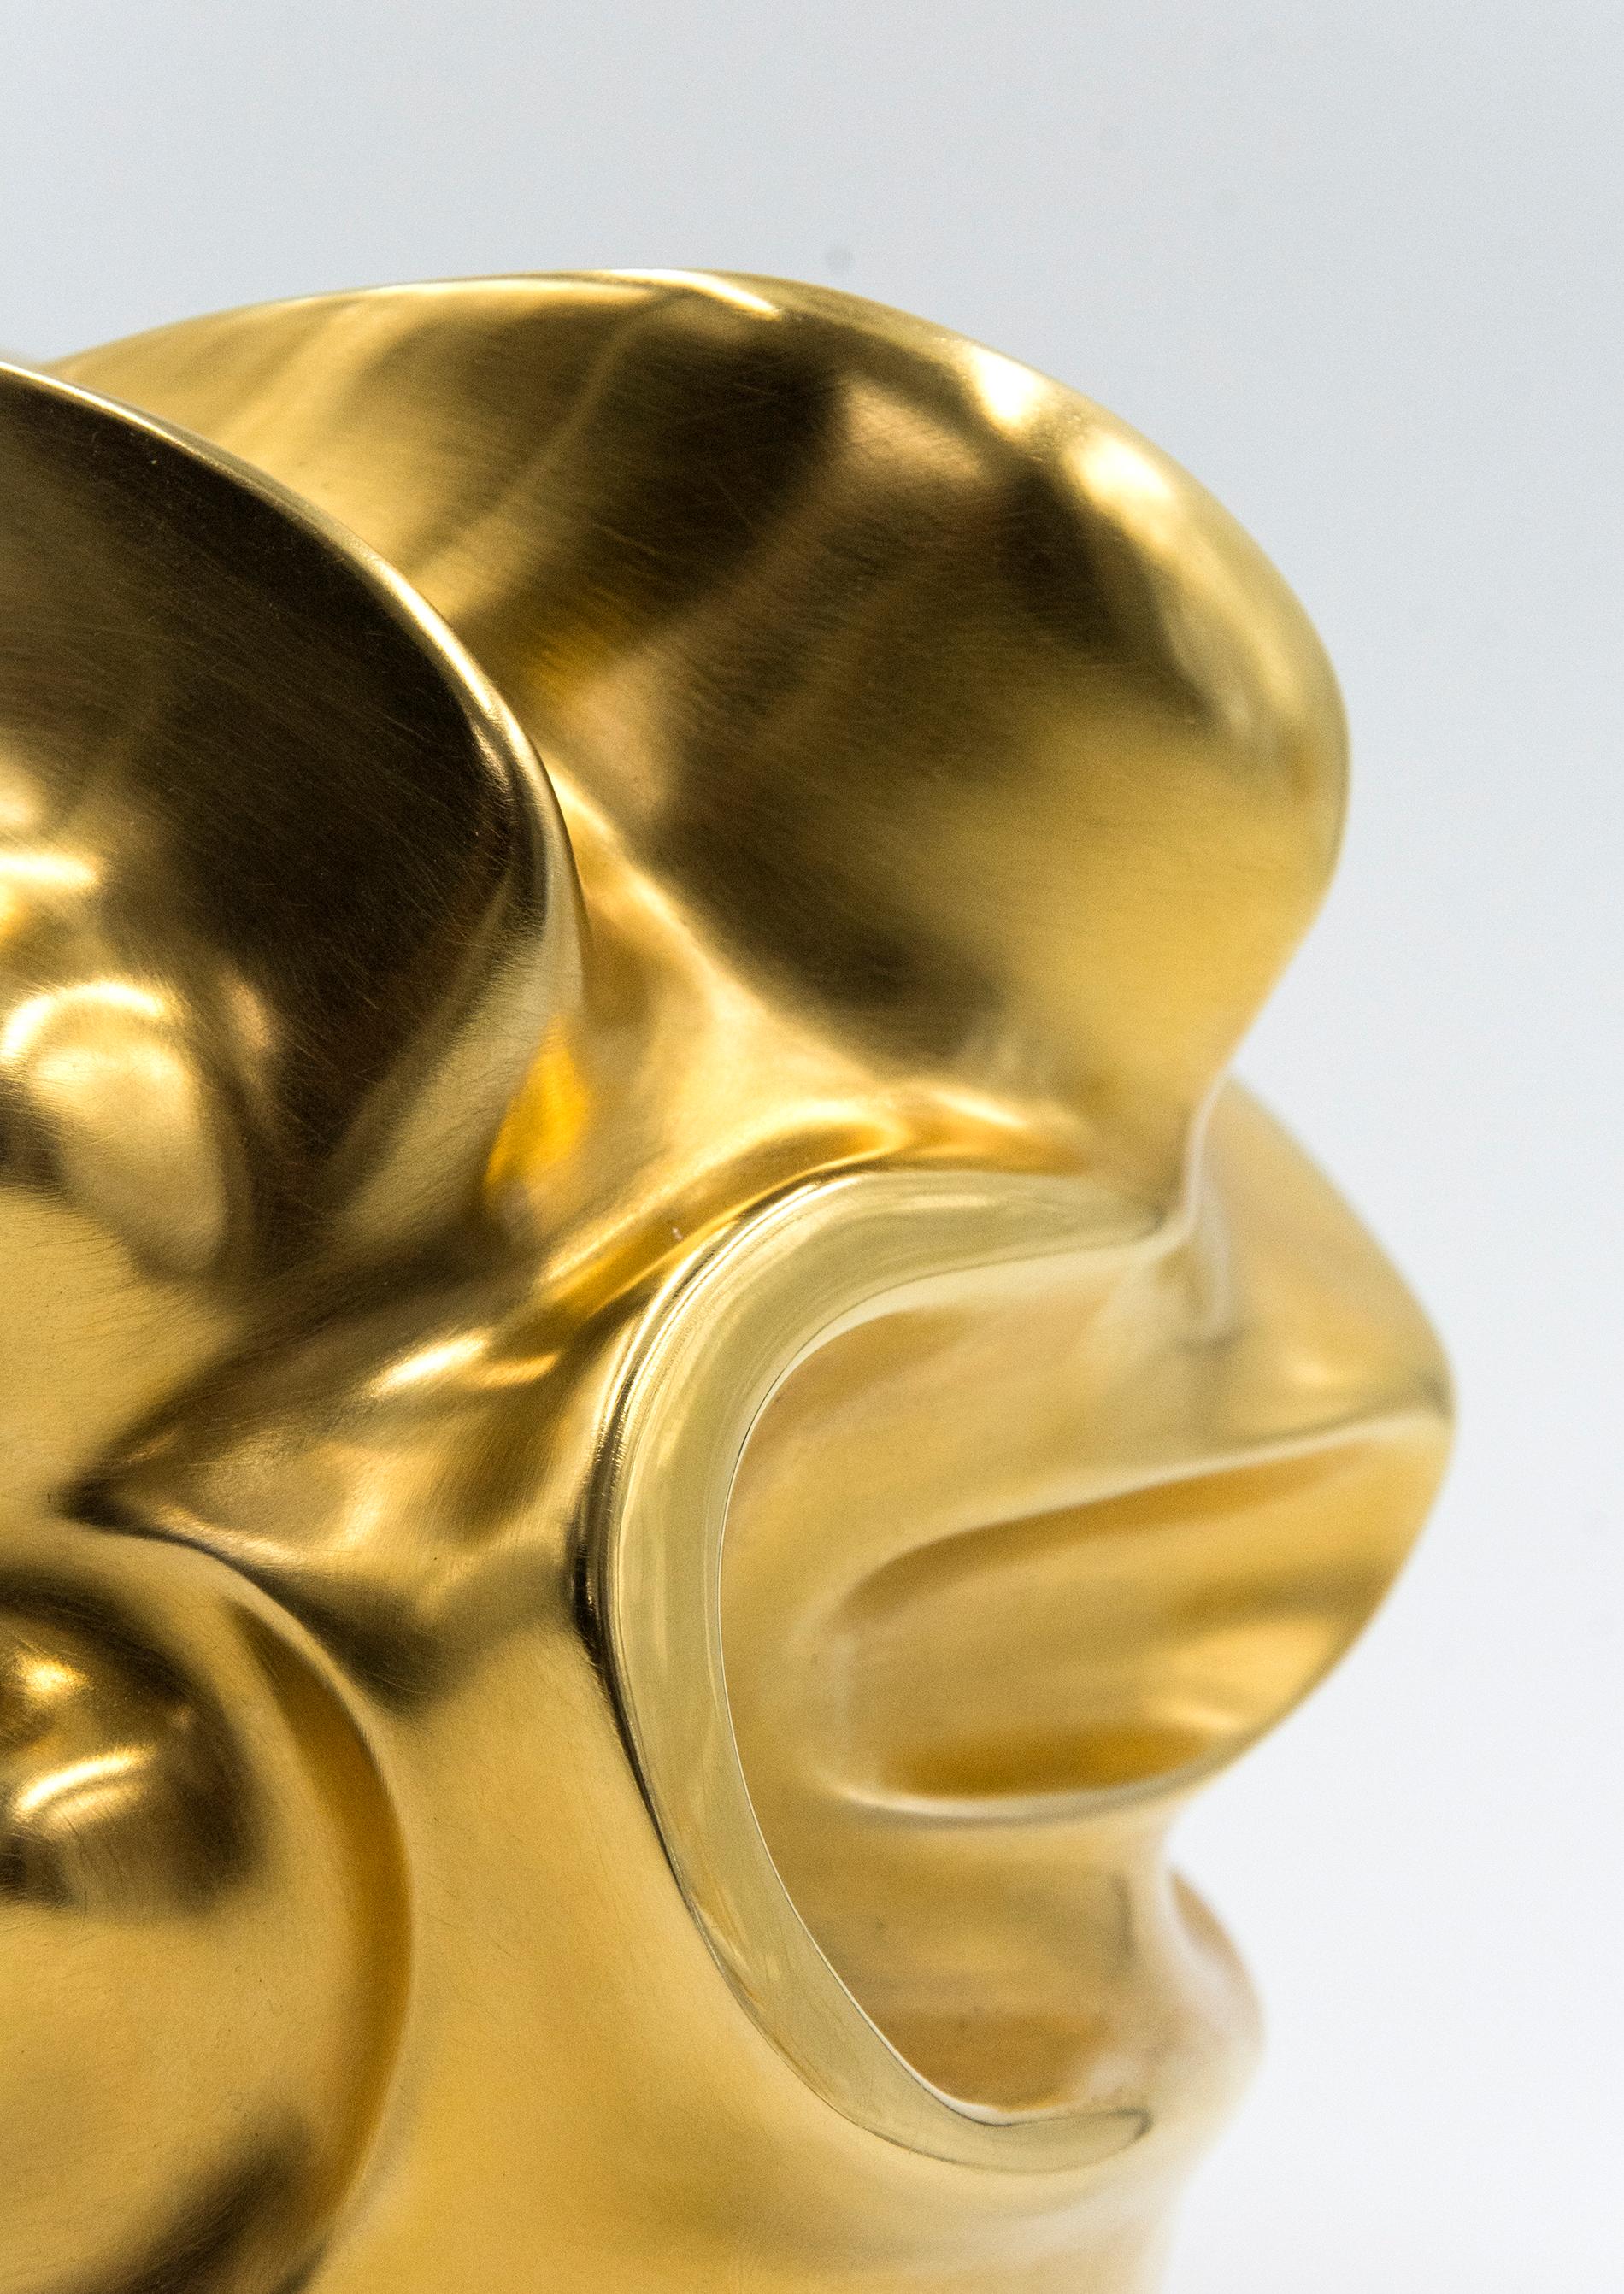 Gold Sisters AP - smooth, 24k gold plated, swirling, abstract, bronze sculpture - Contemporary Sculpture by Tim Forbes